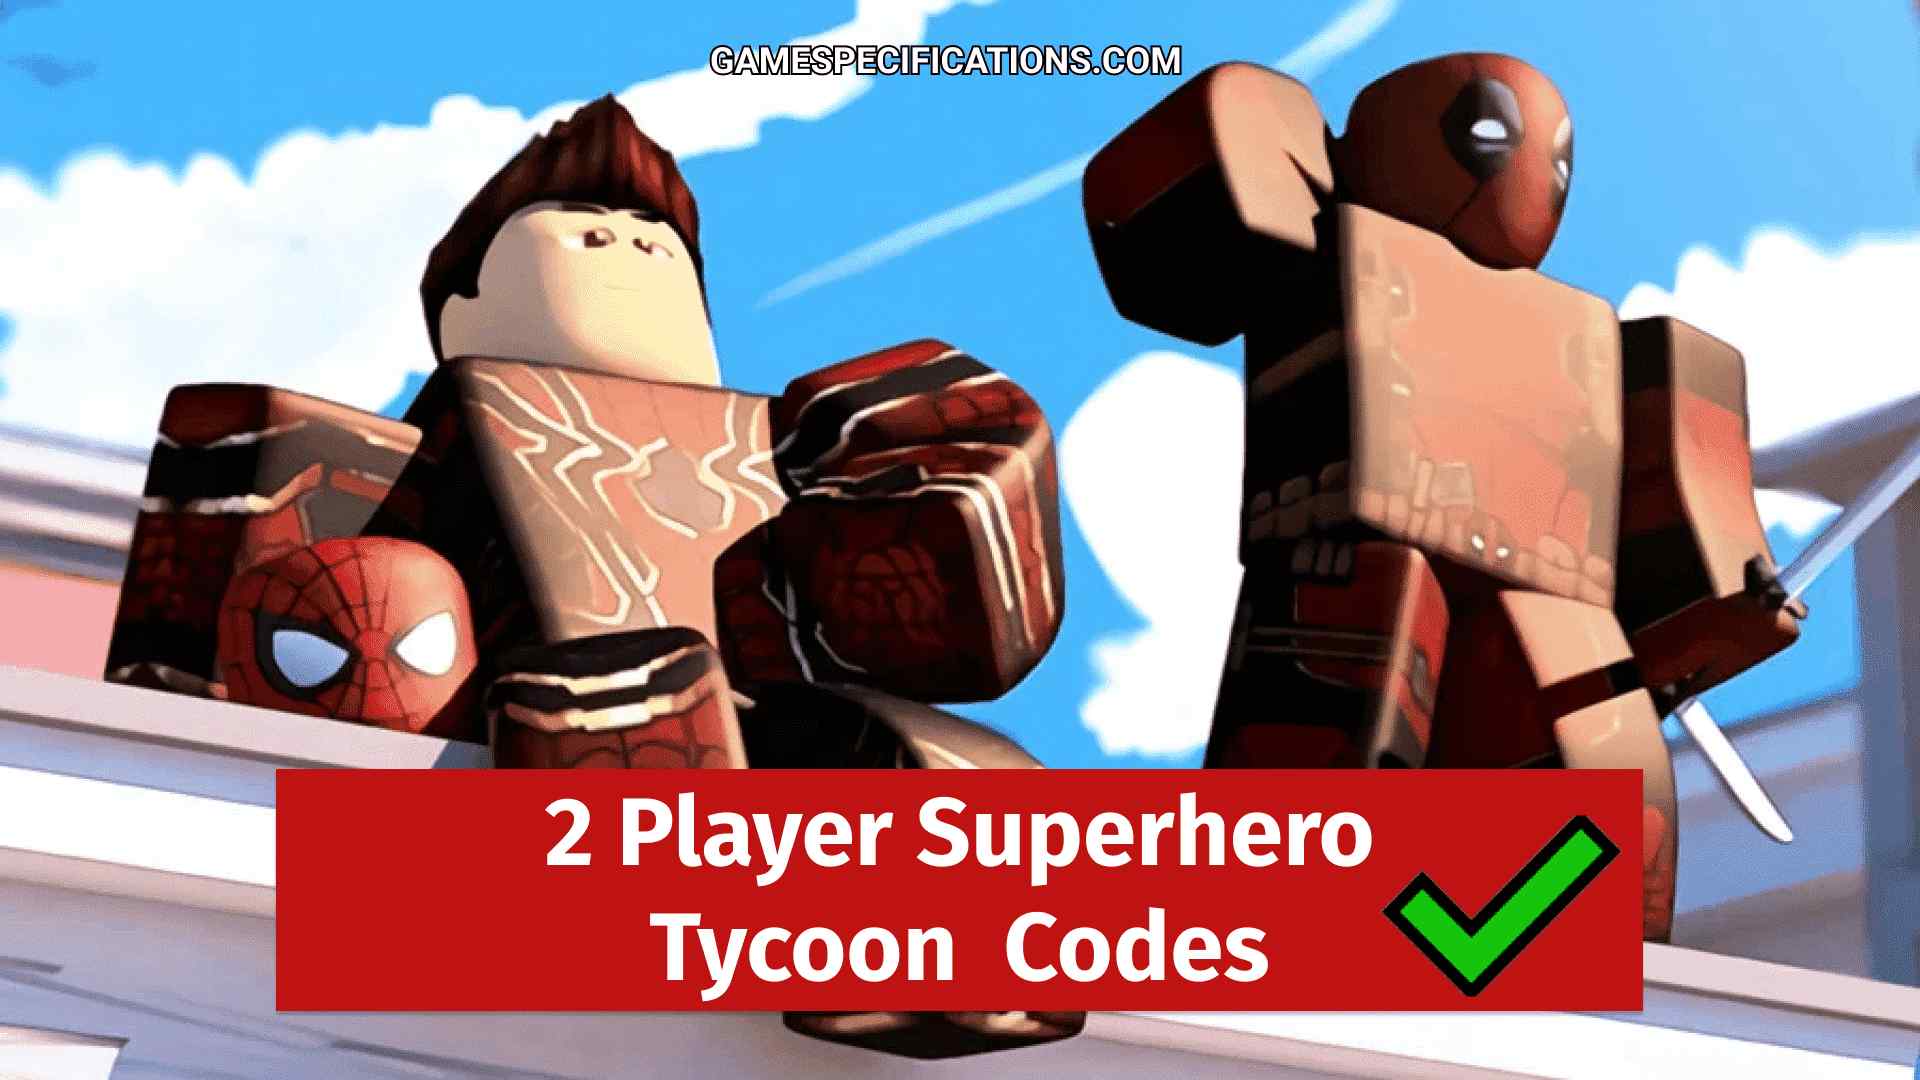 Roblox 2 Player Superhero Tycoon Codes July 2021 Game Specifications - roblox superhero package id